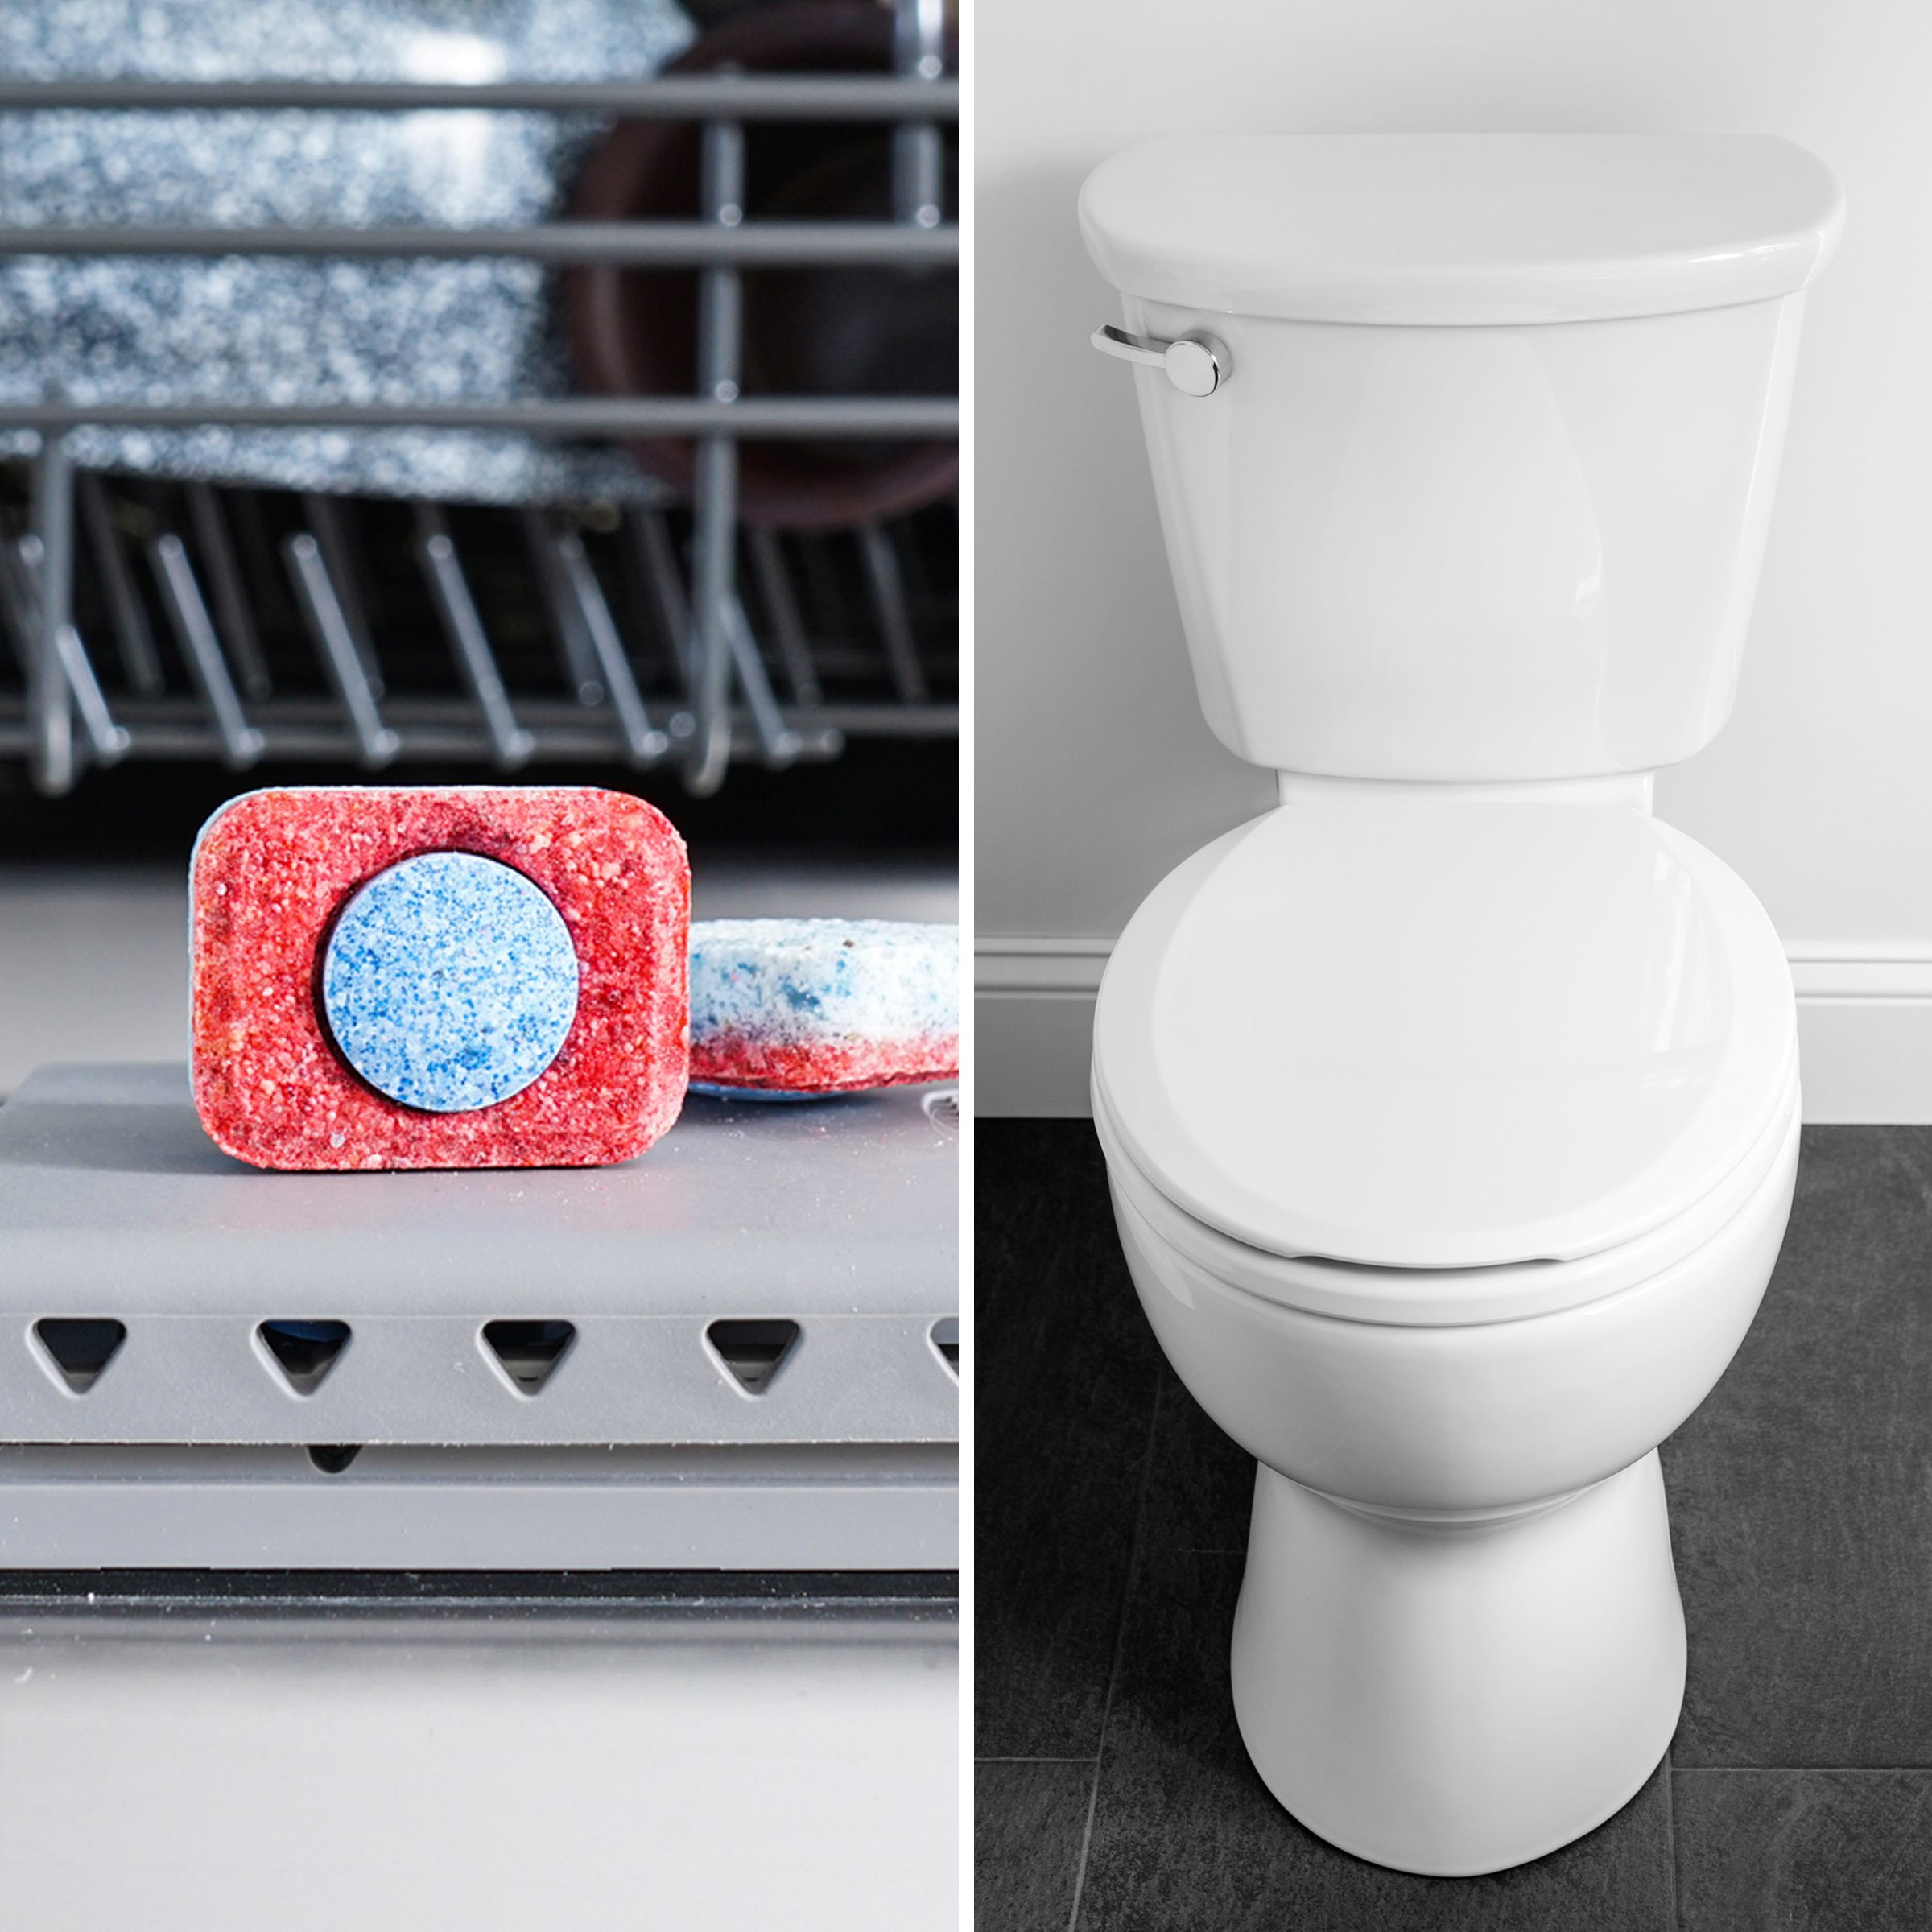 How to Use a Dishwasher Tablet to Clean Toilet (and Why It Works)